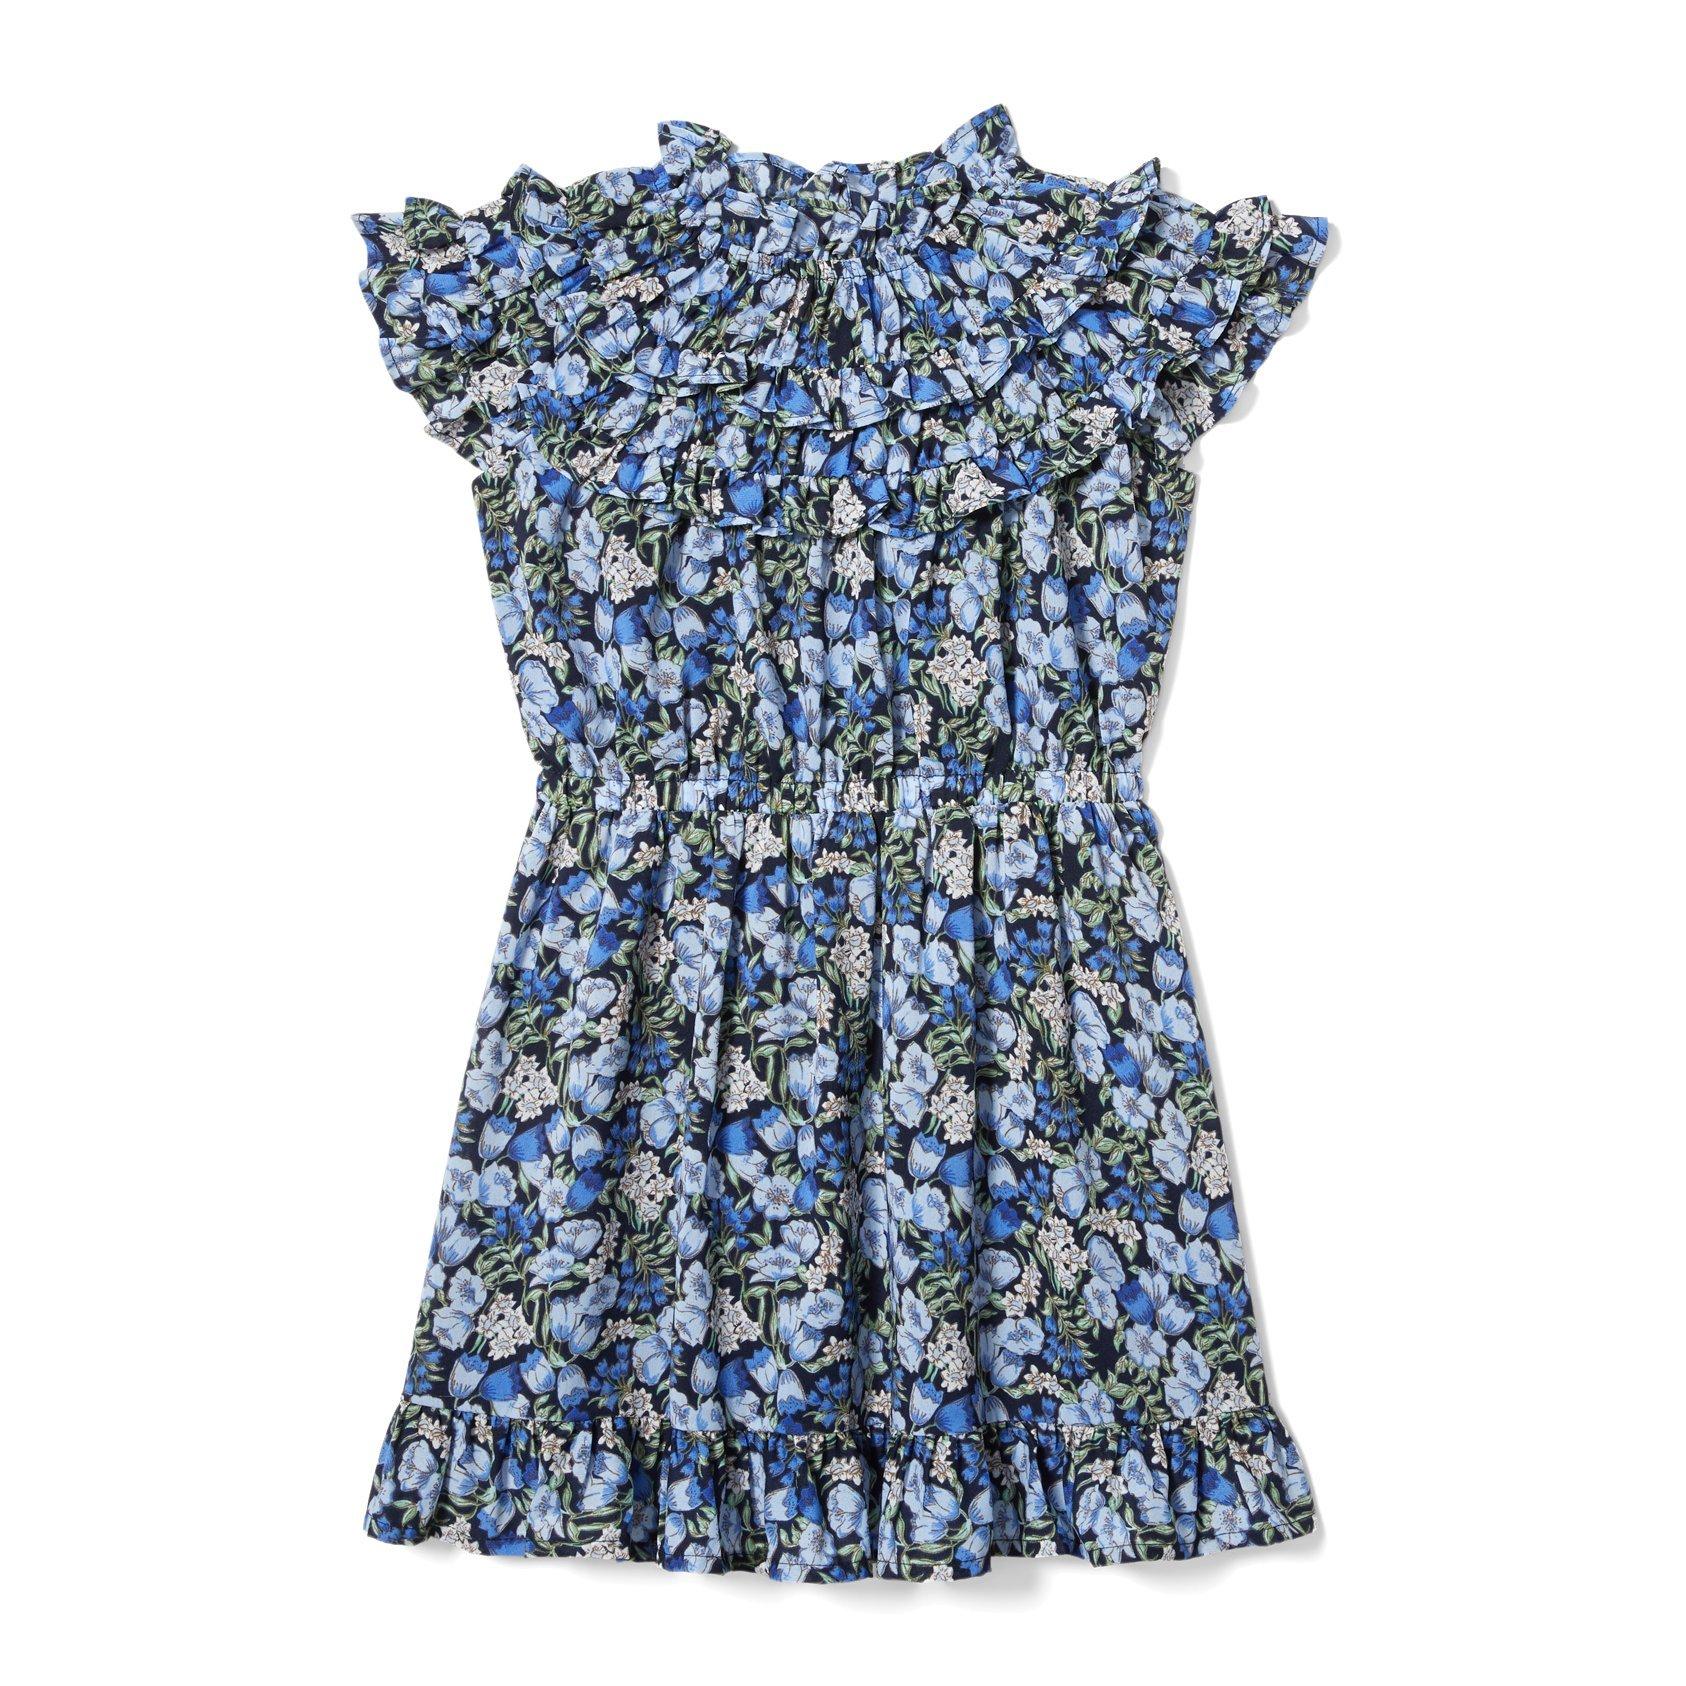 Merchant Marine Floral Floral Chiffon Dress by Janie and Jack